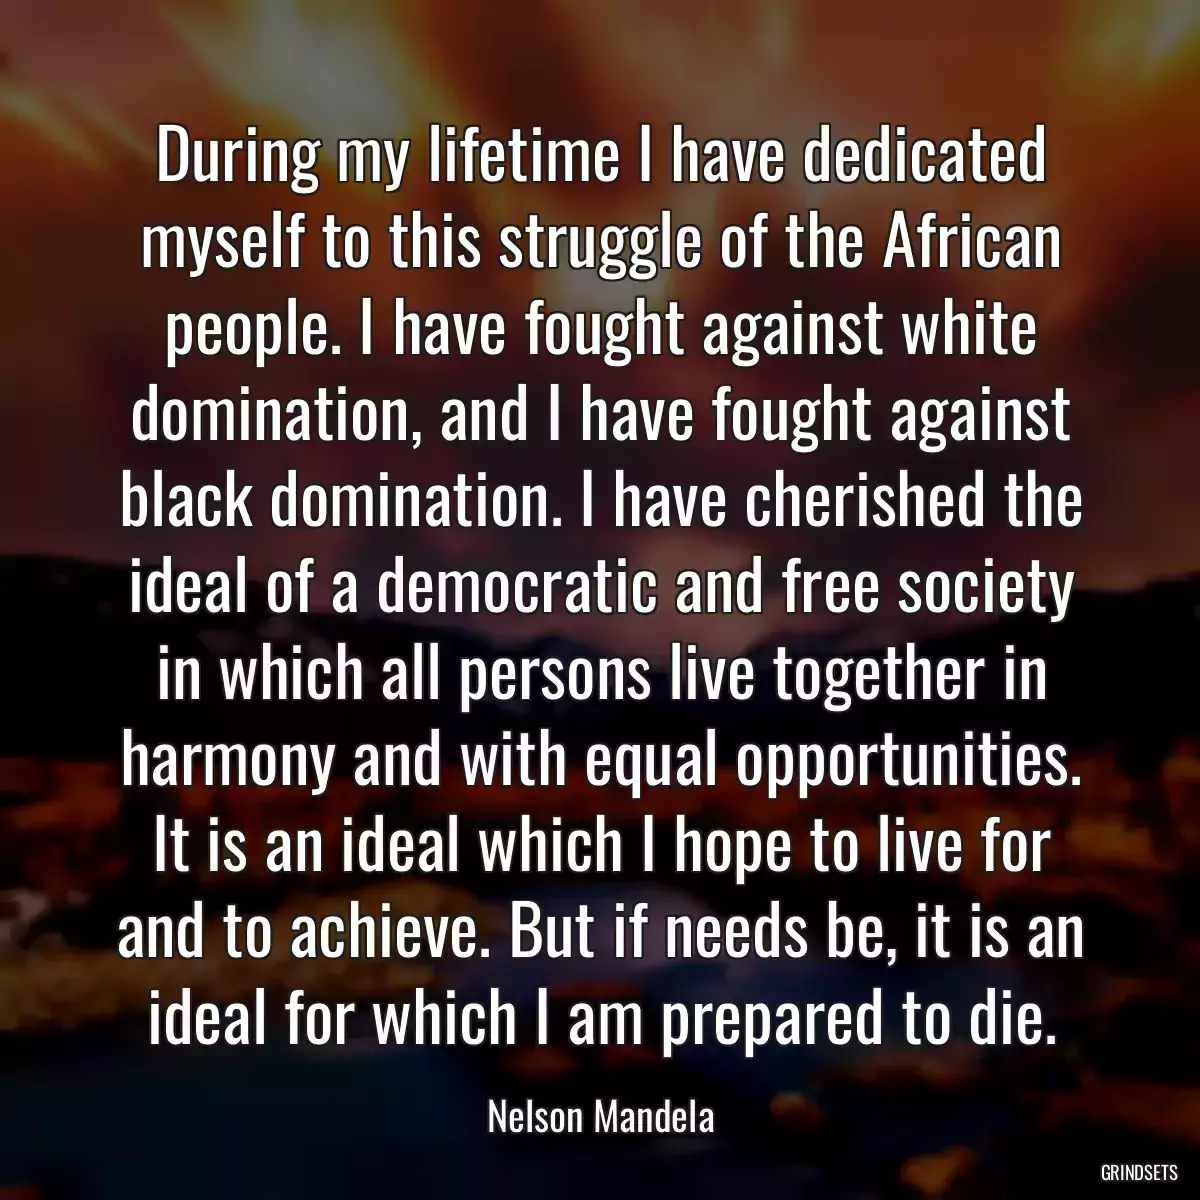 During my lifetime I have dedicated myself to this struggle of the African people. I have fought against white domination, and I have fought against black domination. I have cherished the ideal of a democratic and free society in which all persons live together in harmony and with equal opportunities. It is an ideal which I hope to live for and to achieve. But if needs be, it is an ideal for which I am prepared to die.